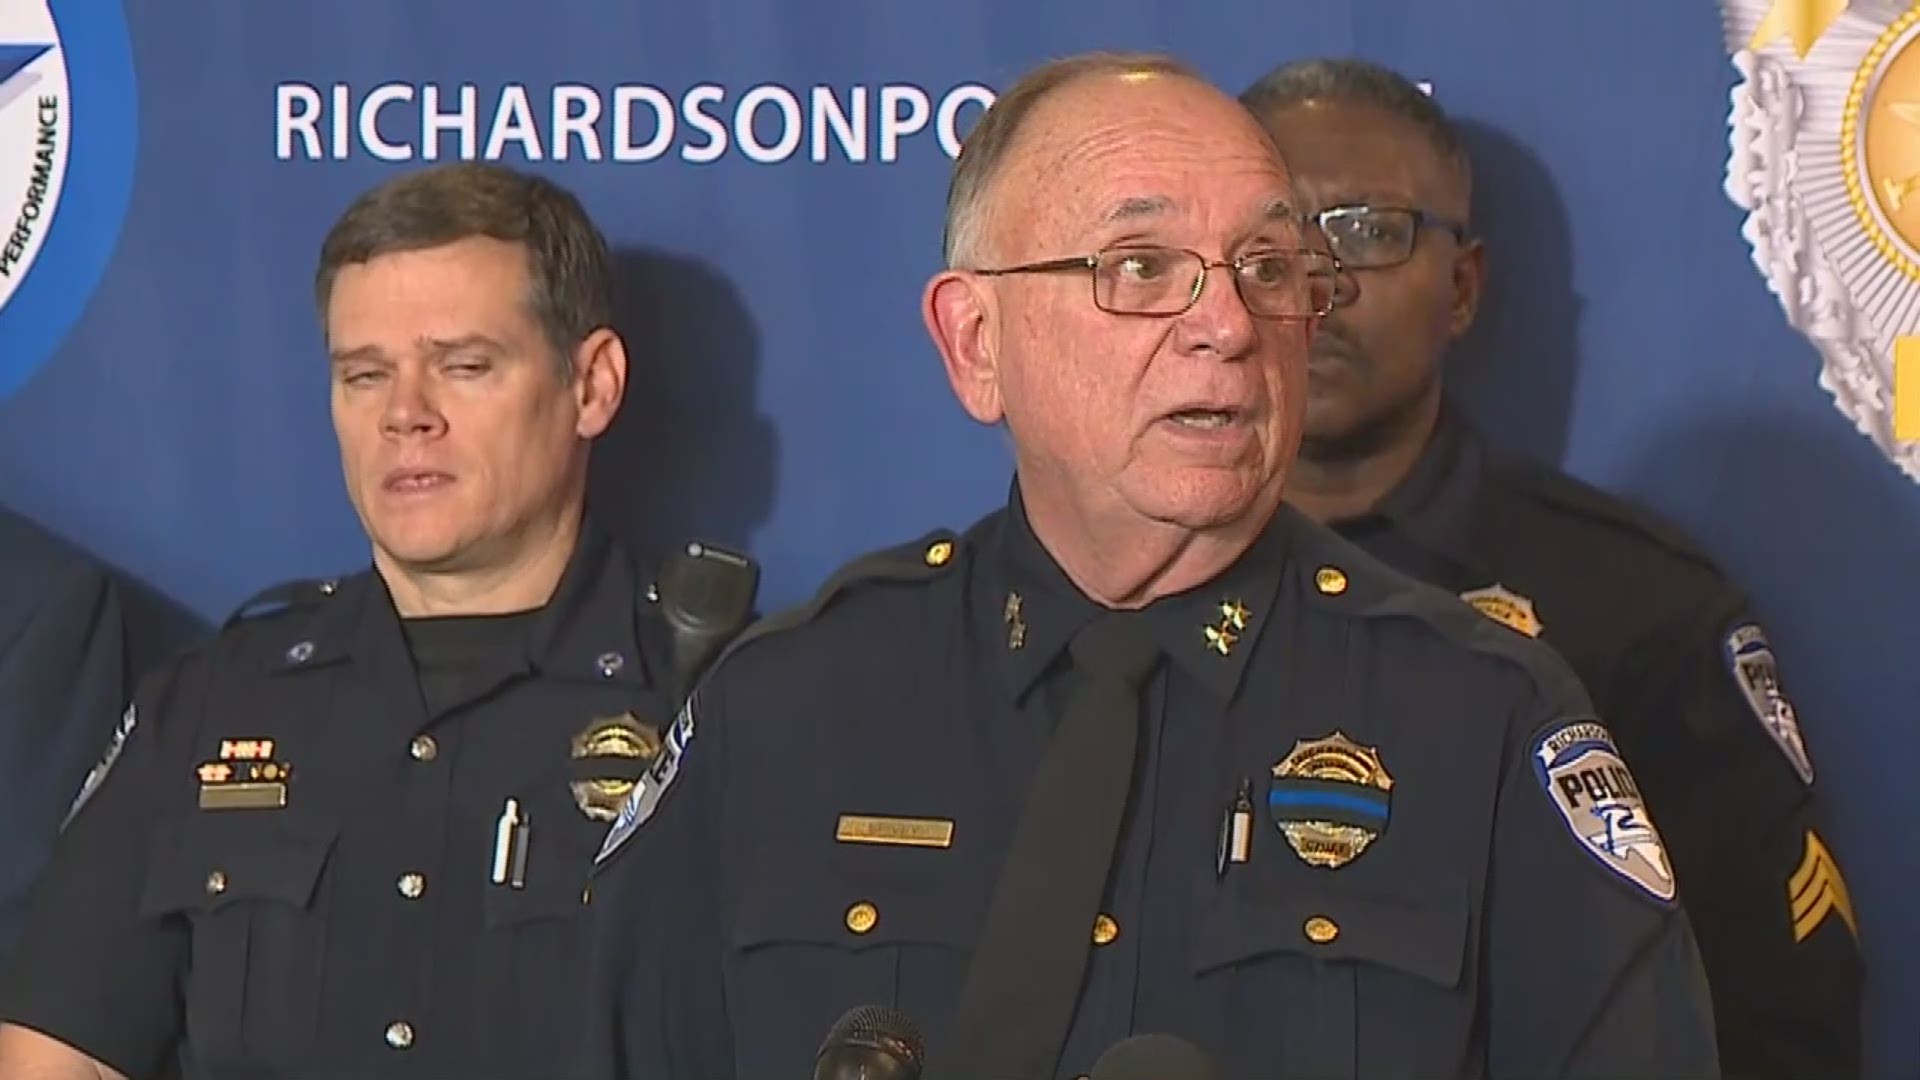 Richardson Police Chief Jimmy Spivey identifies the officer gunned down in the line of duty Feb. 7.